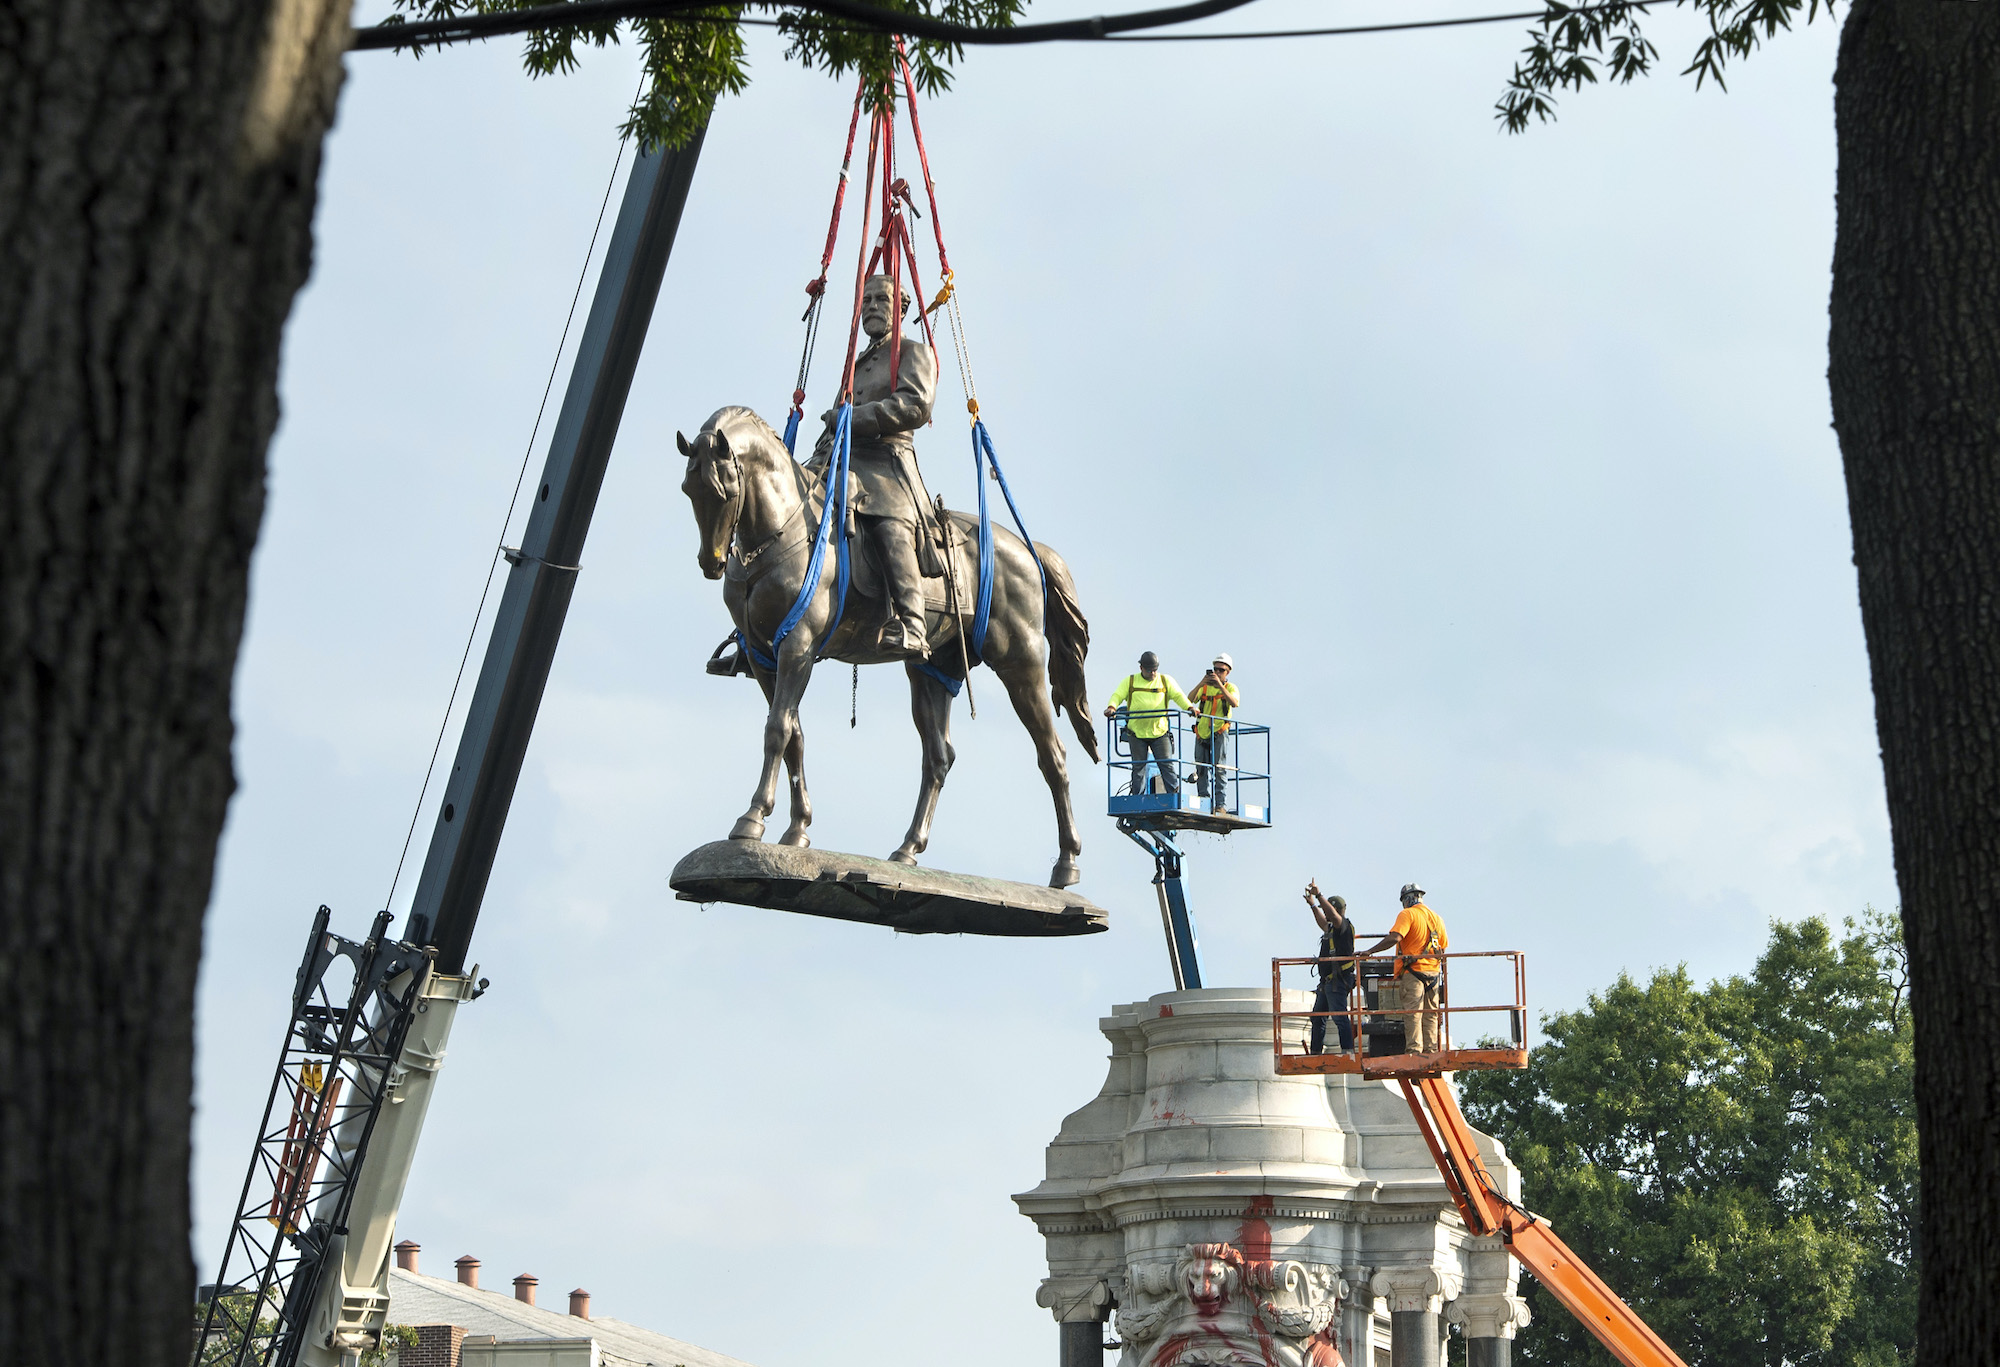 The Robert E. Lee monument hanging in the air as it is removed from the statue's base.